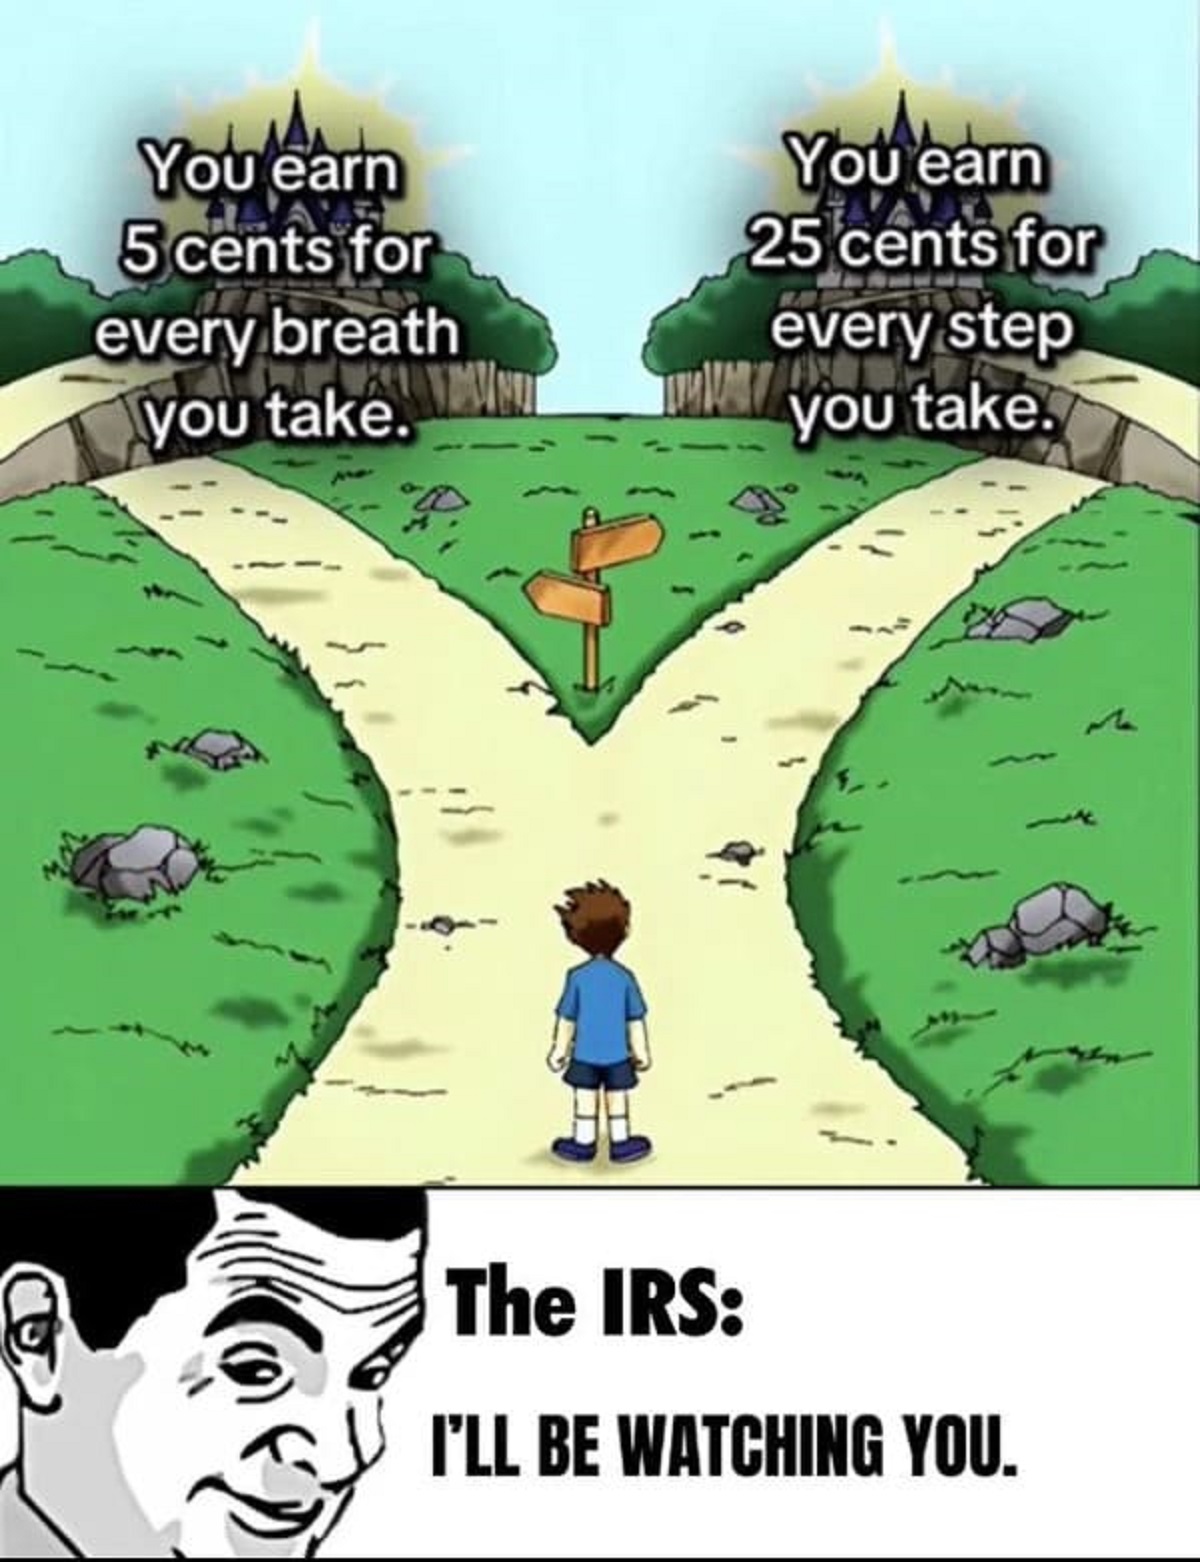 way western man - You earn 5 cents for every breath you take. D You earn 25 cents for every step you take. The Irs I'Ll Be Watching You. M